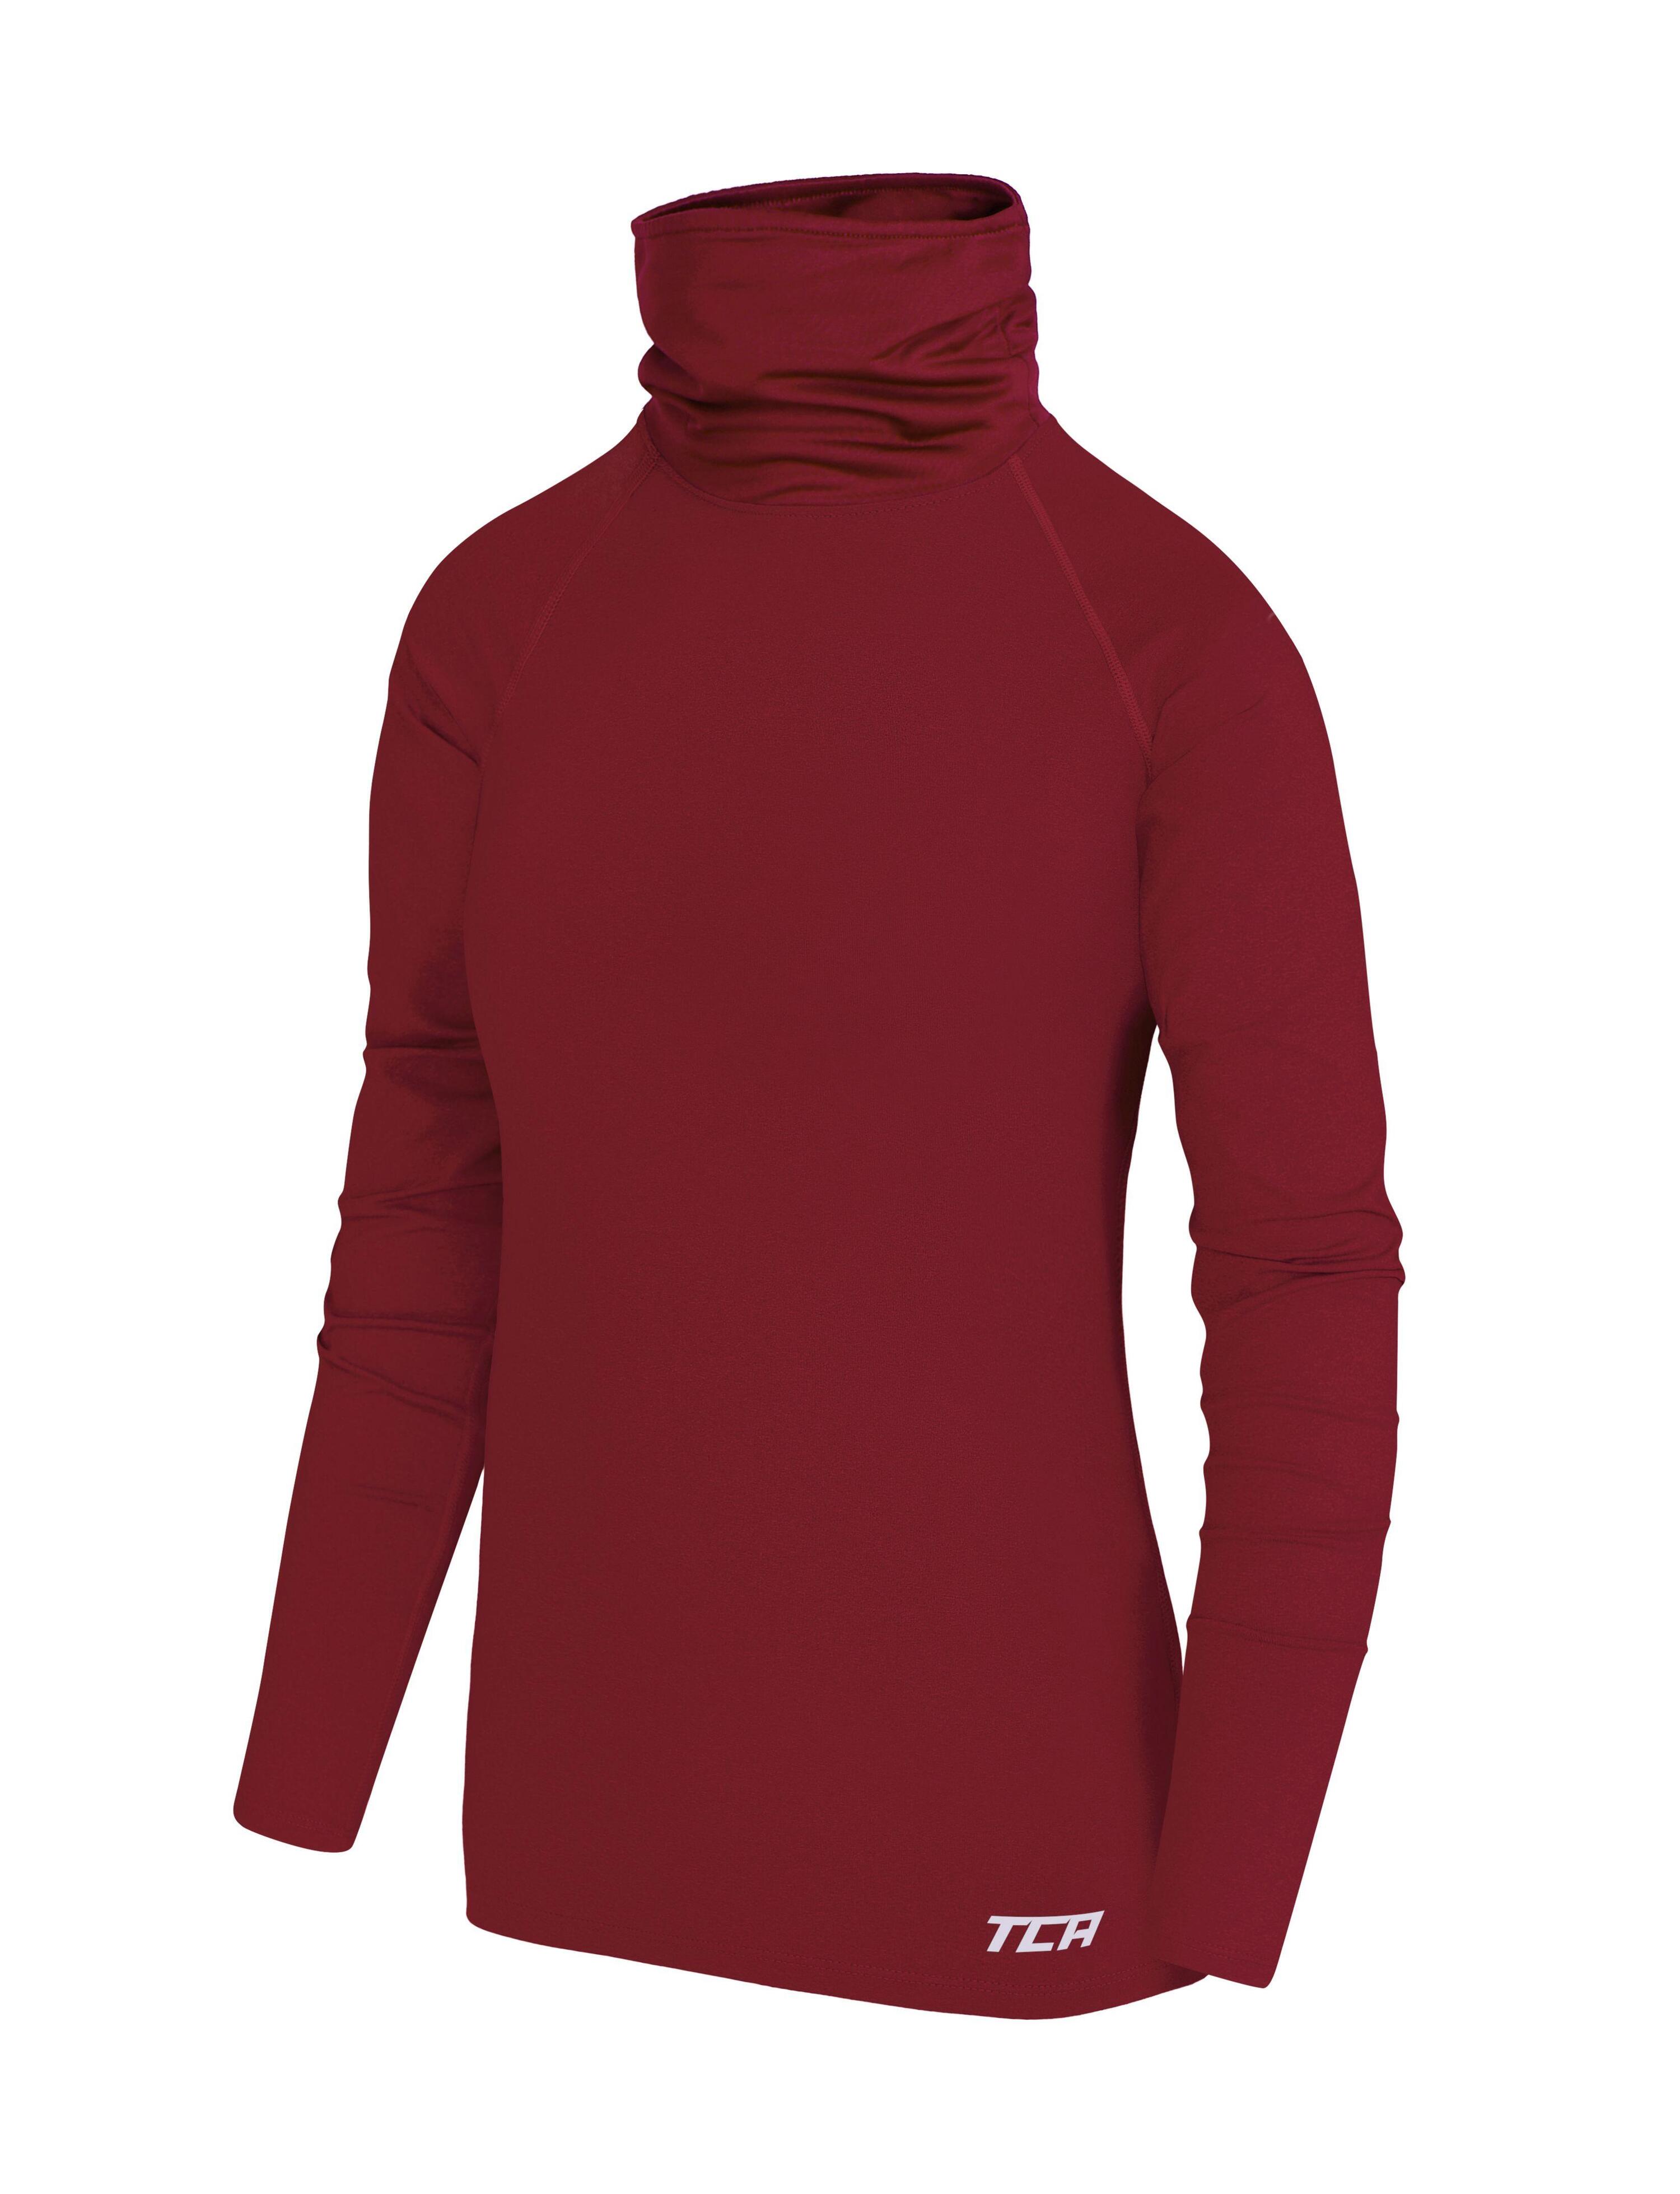 Girls' Thermal Funnel Neck Top - Cabernet 1/5